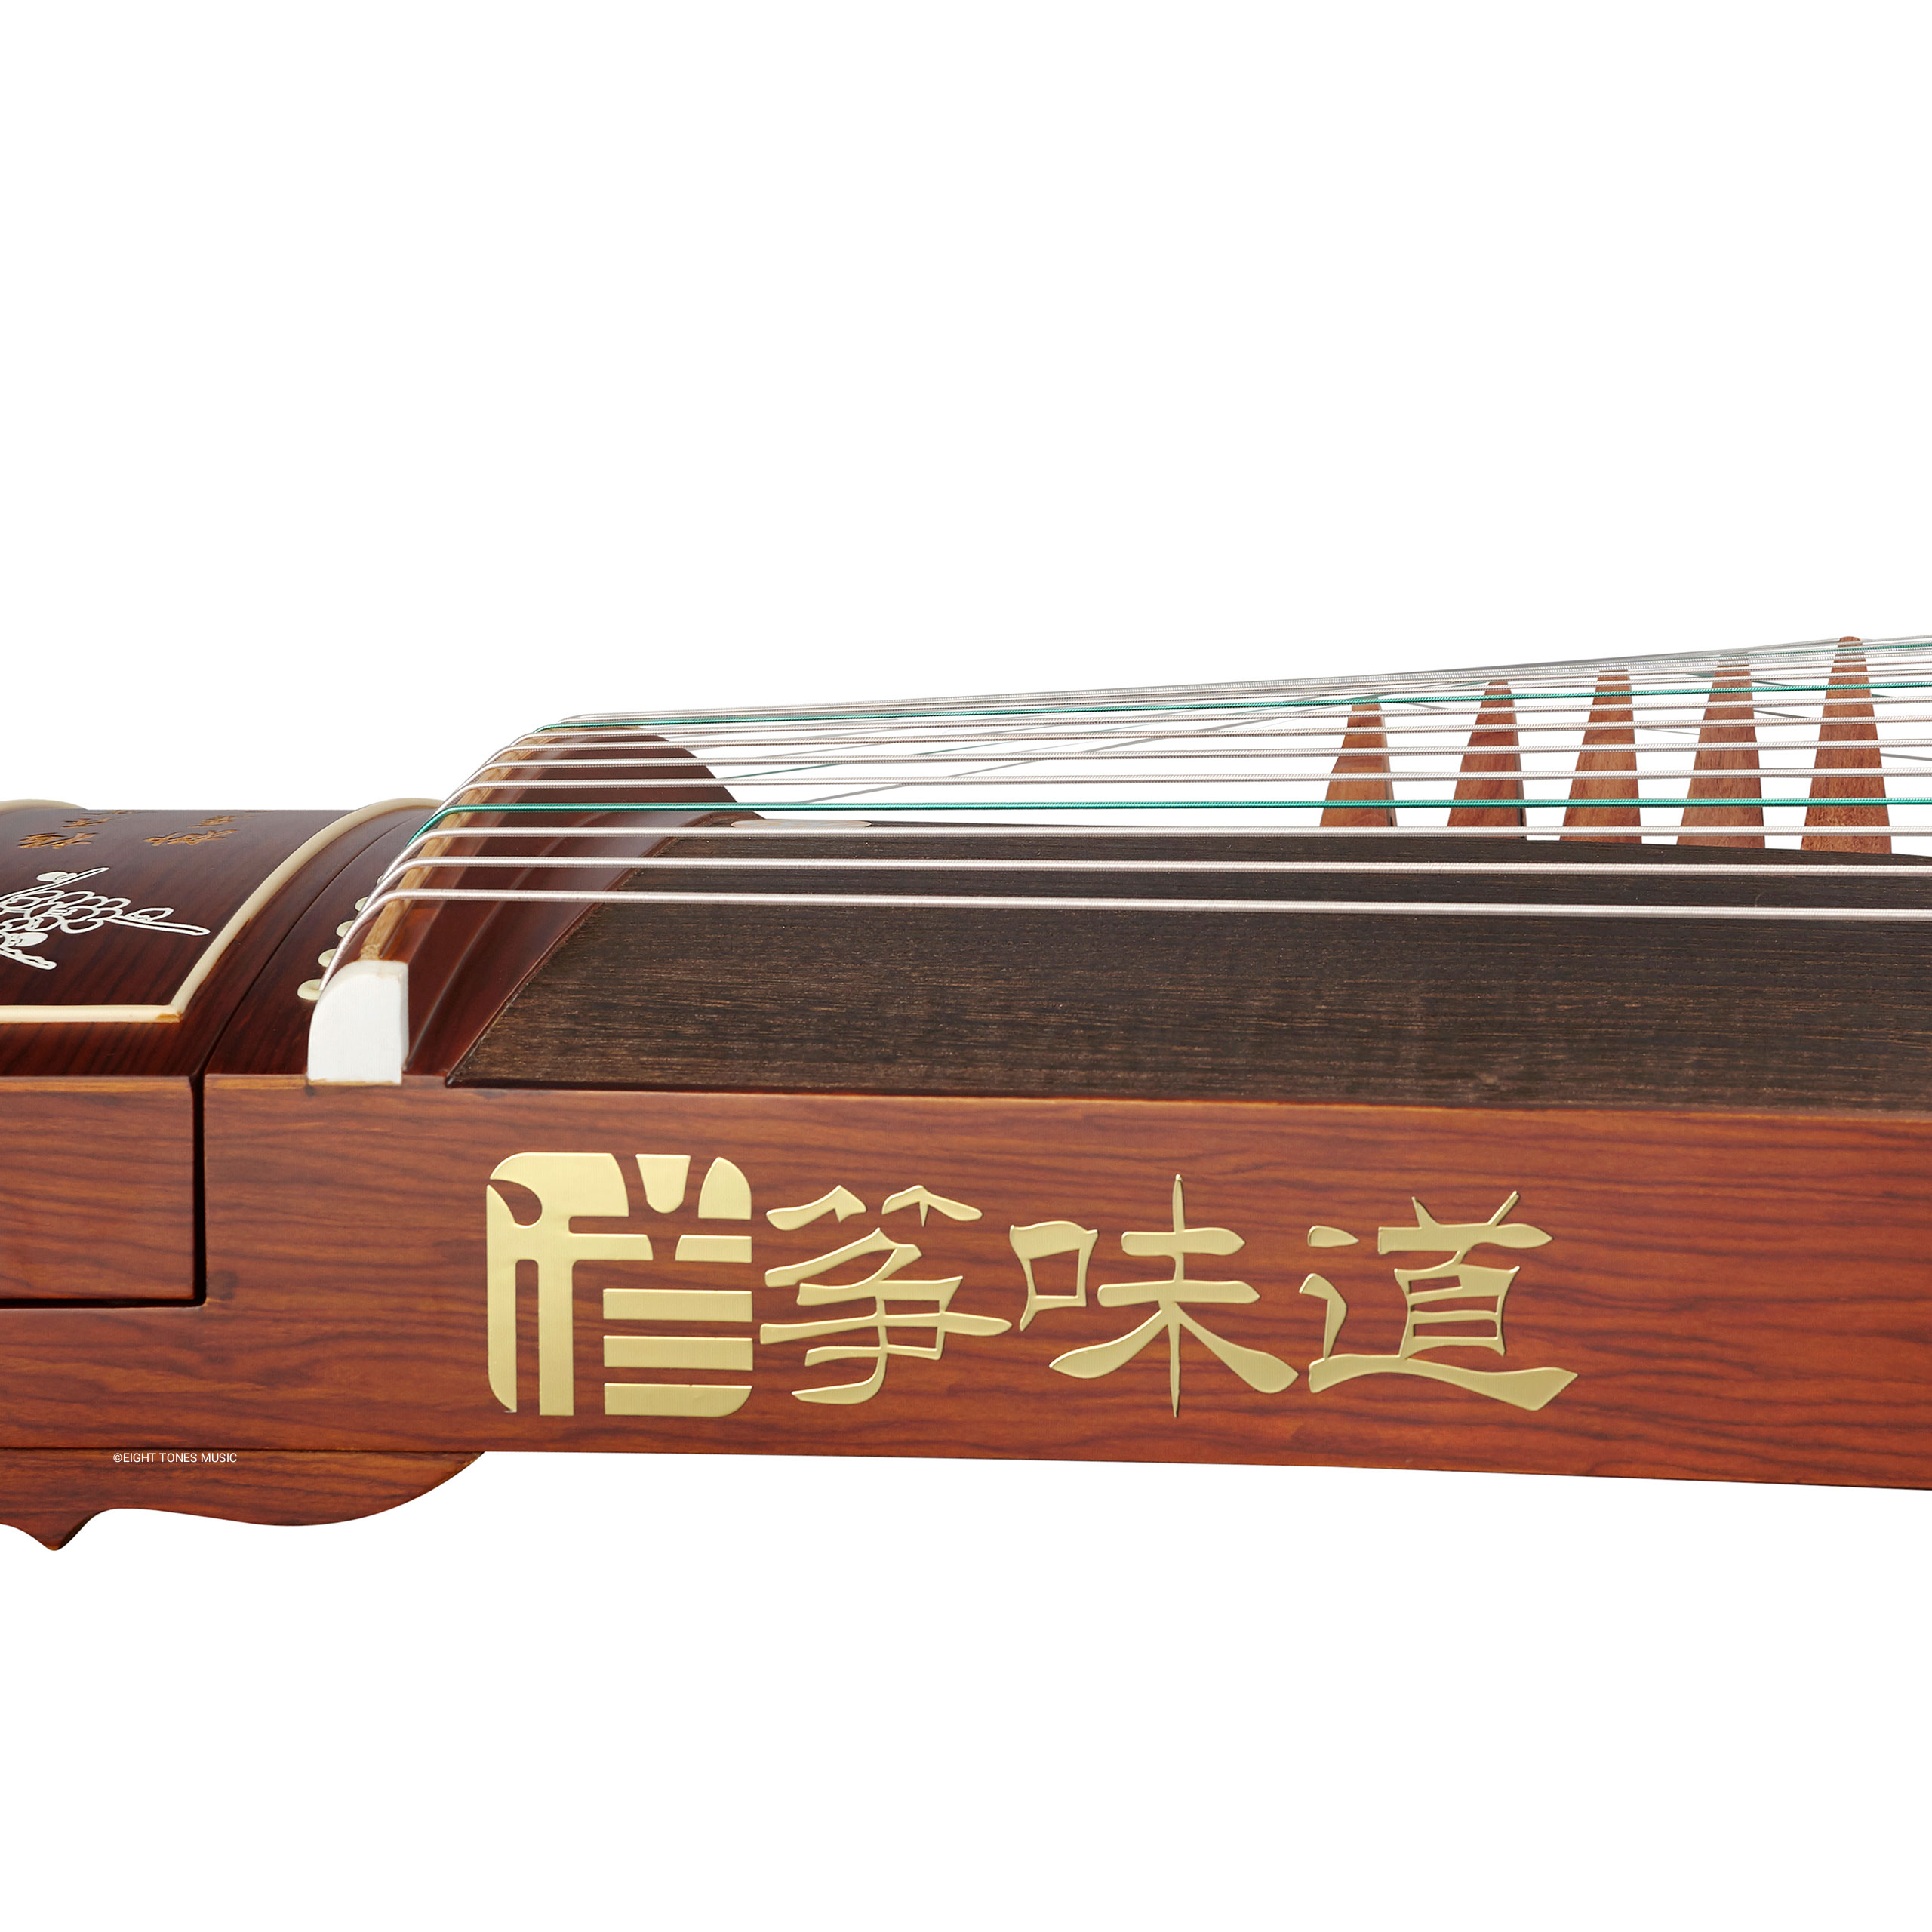 Zhonghao 'Plum Blossoms In Winter' Rosewood Guzheng Sideboard with brand